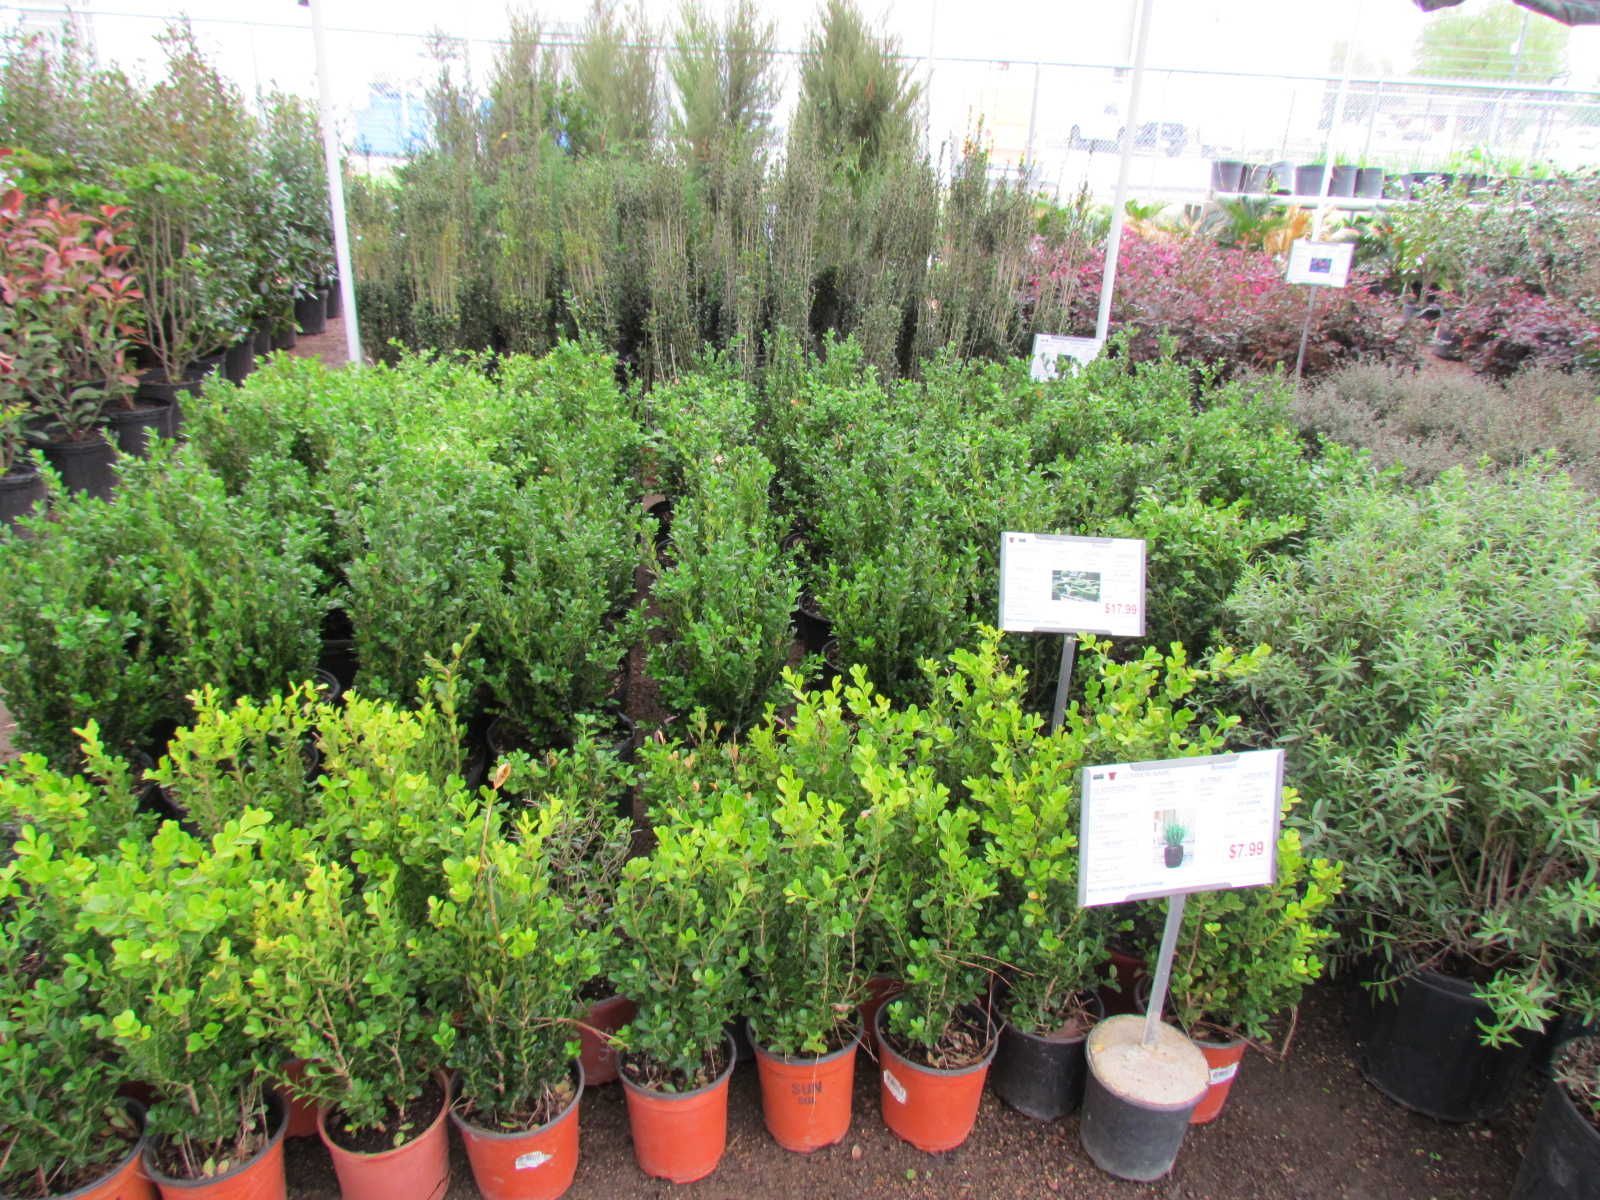 Large variety of shrubs including Encore Azaleas, Boxwoods, Yaupons, Crotons, Drift Roses and more at Madison Gardens Nursery, Spring, TX